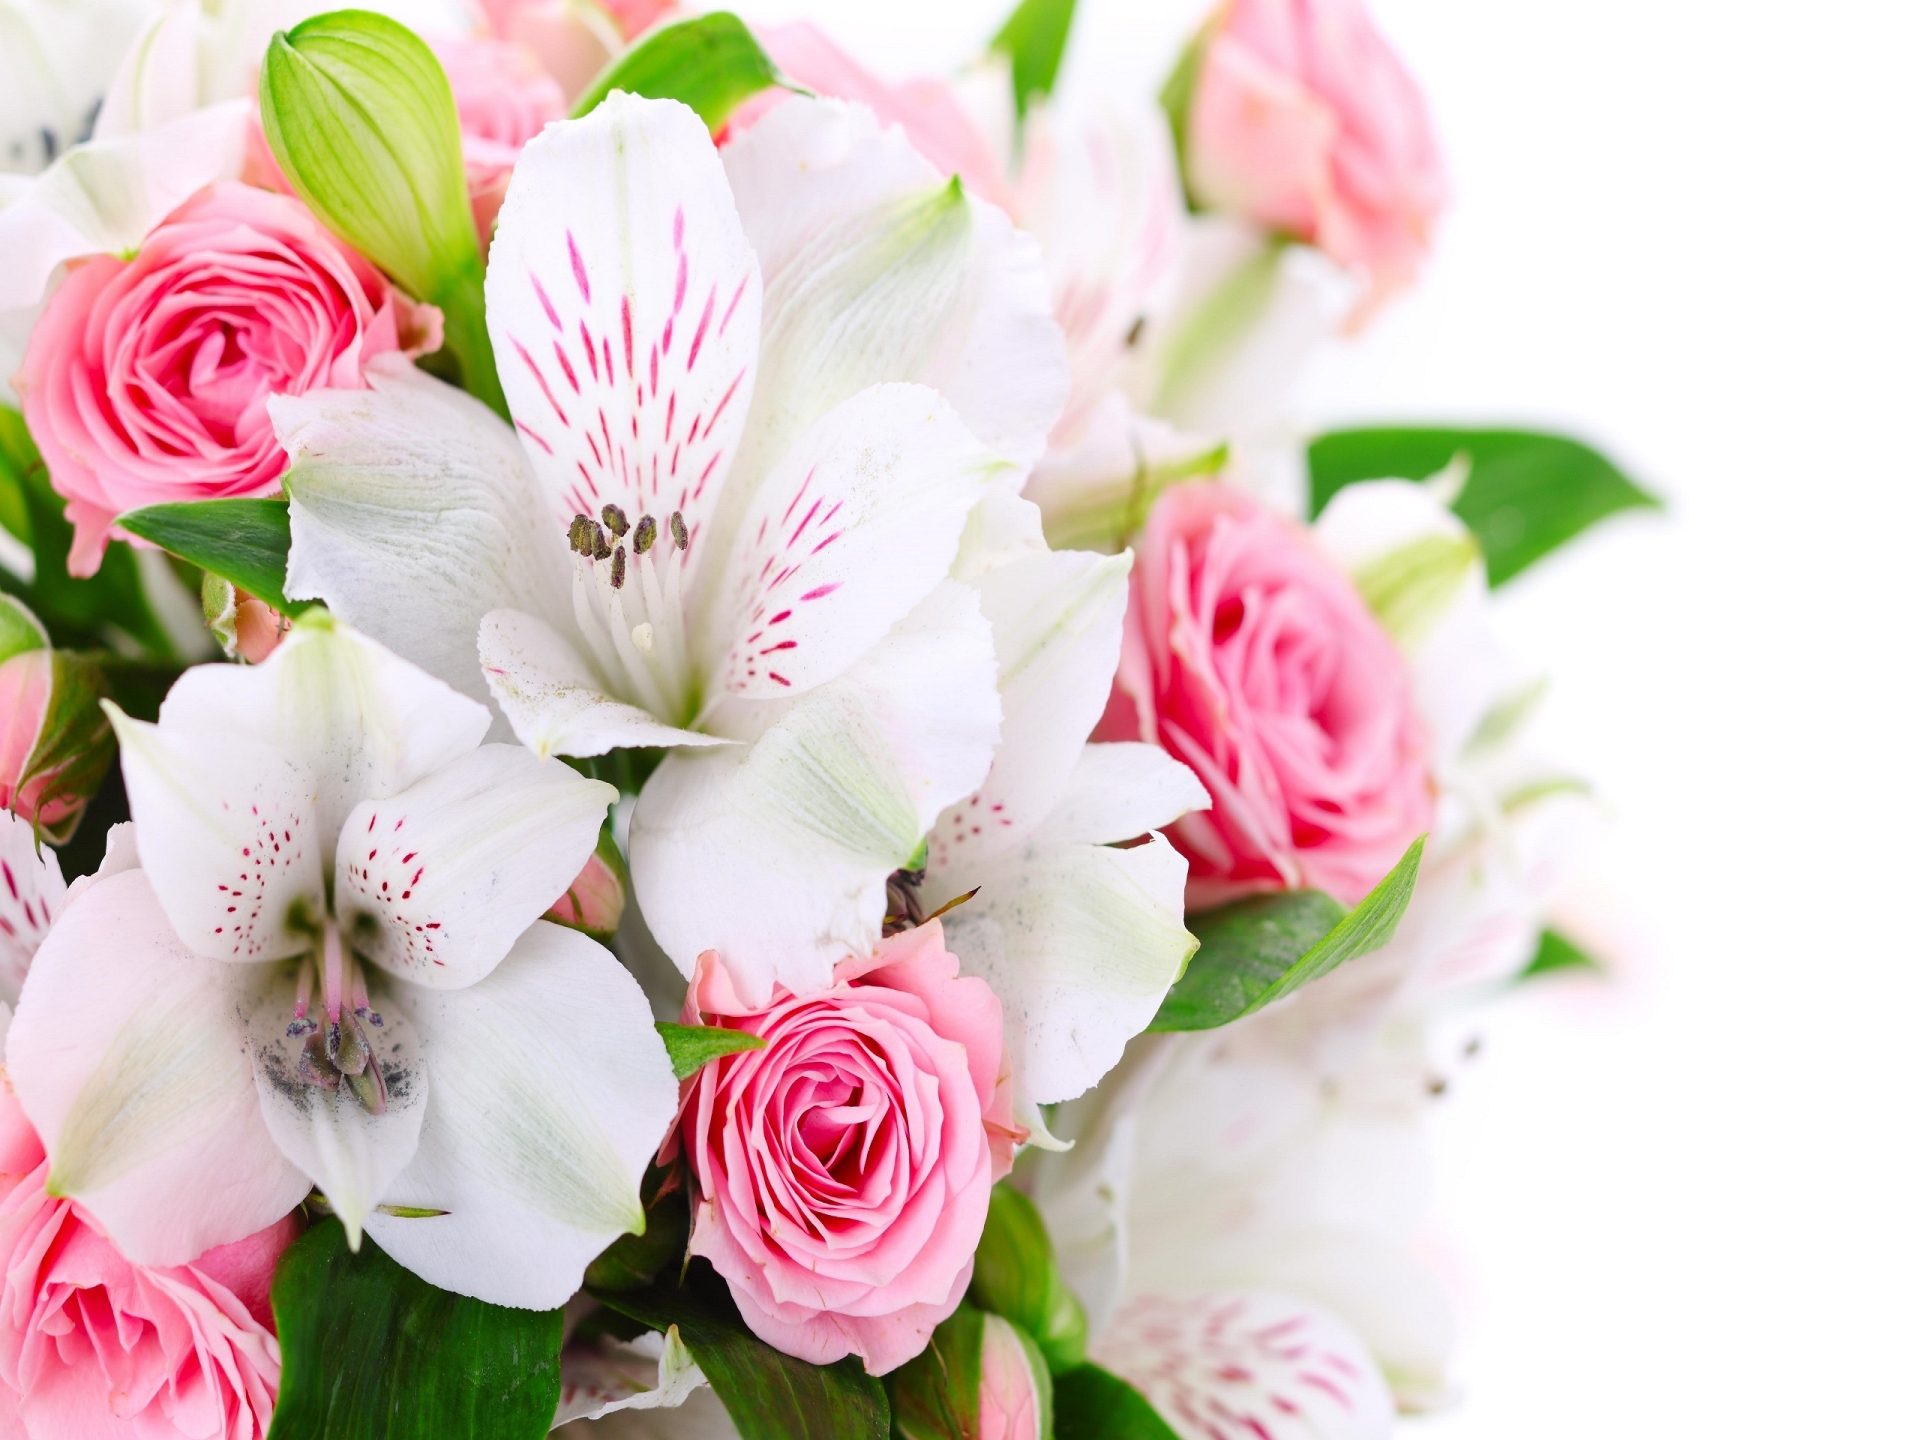 Pink Roses and White Lilies  for 1920 x 1440 resolution